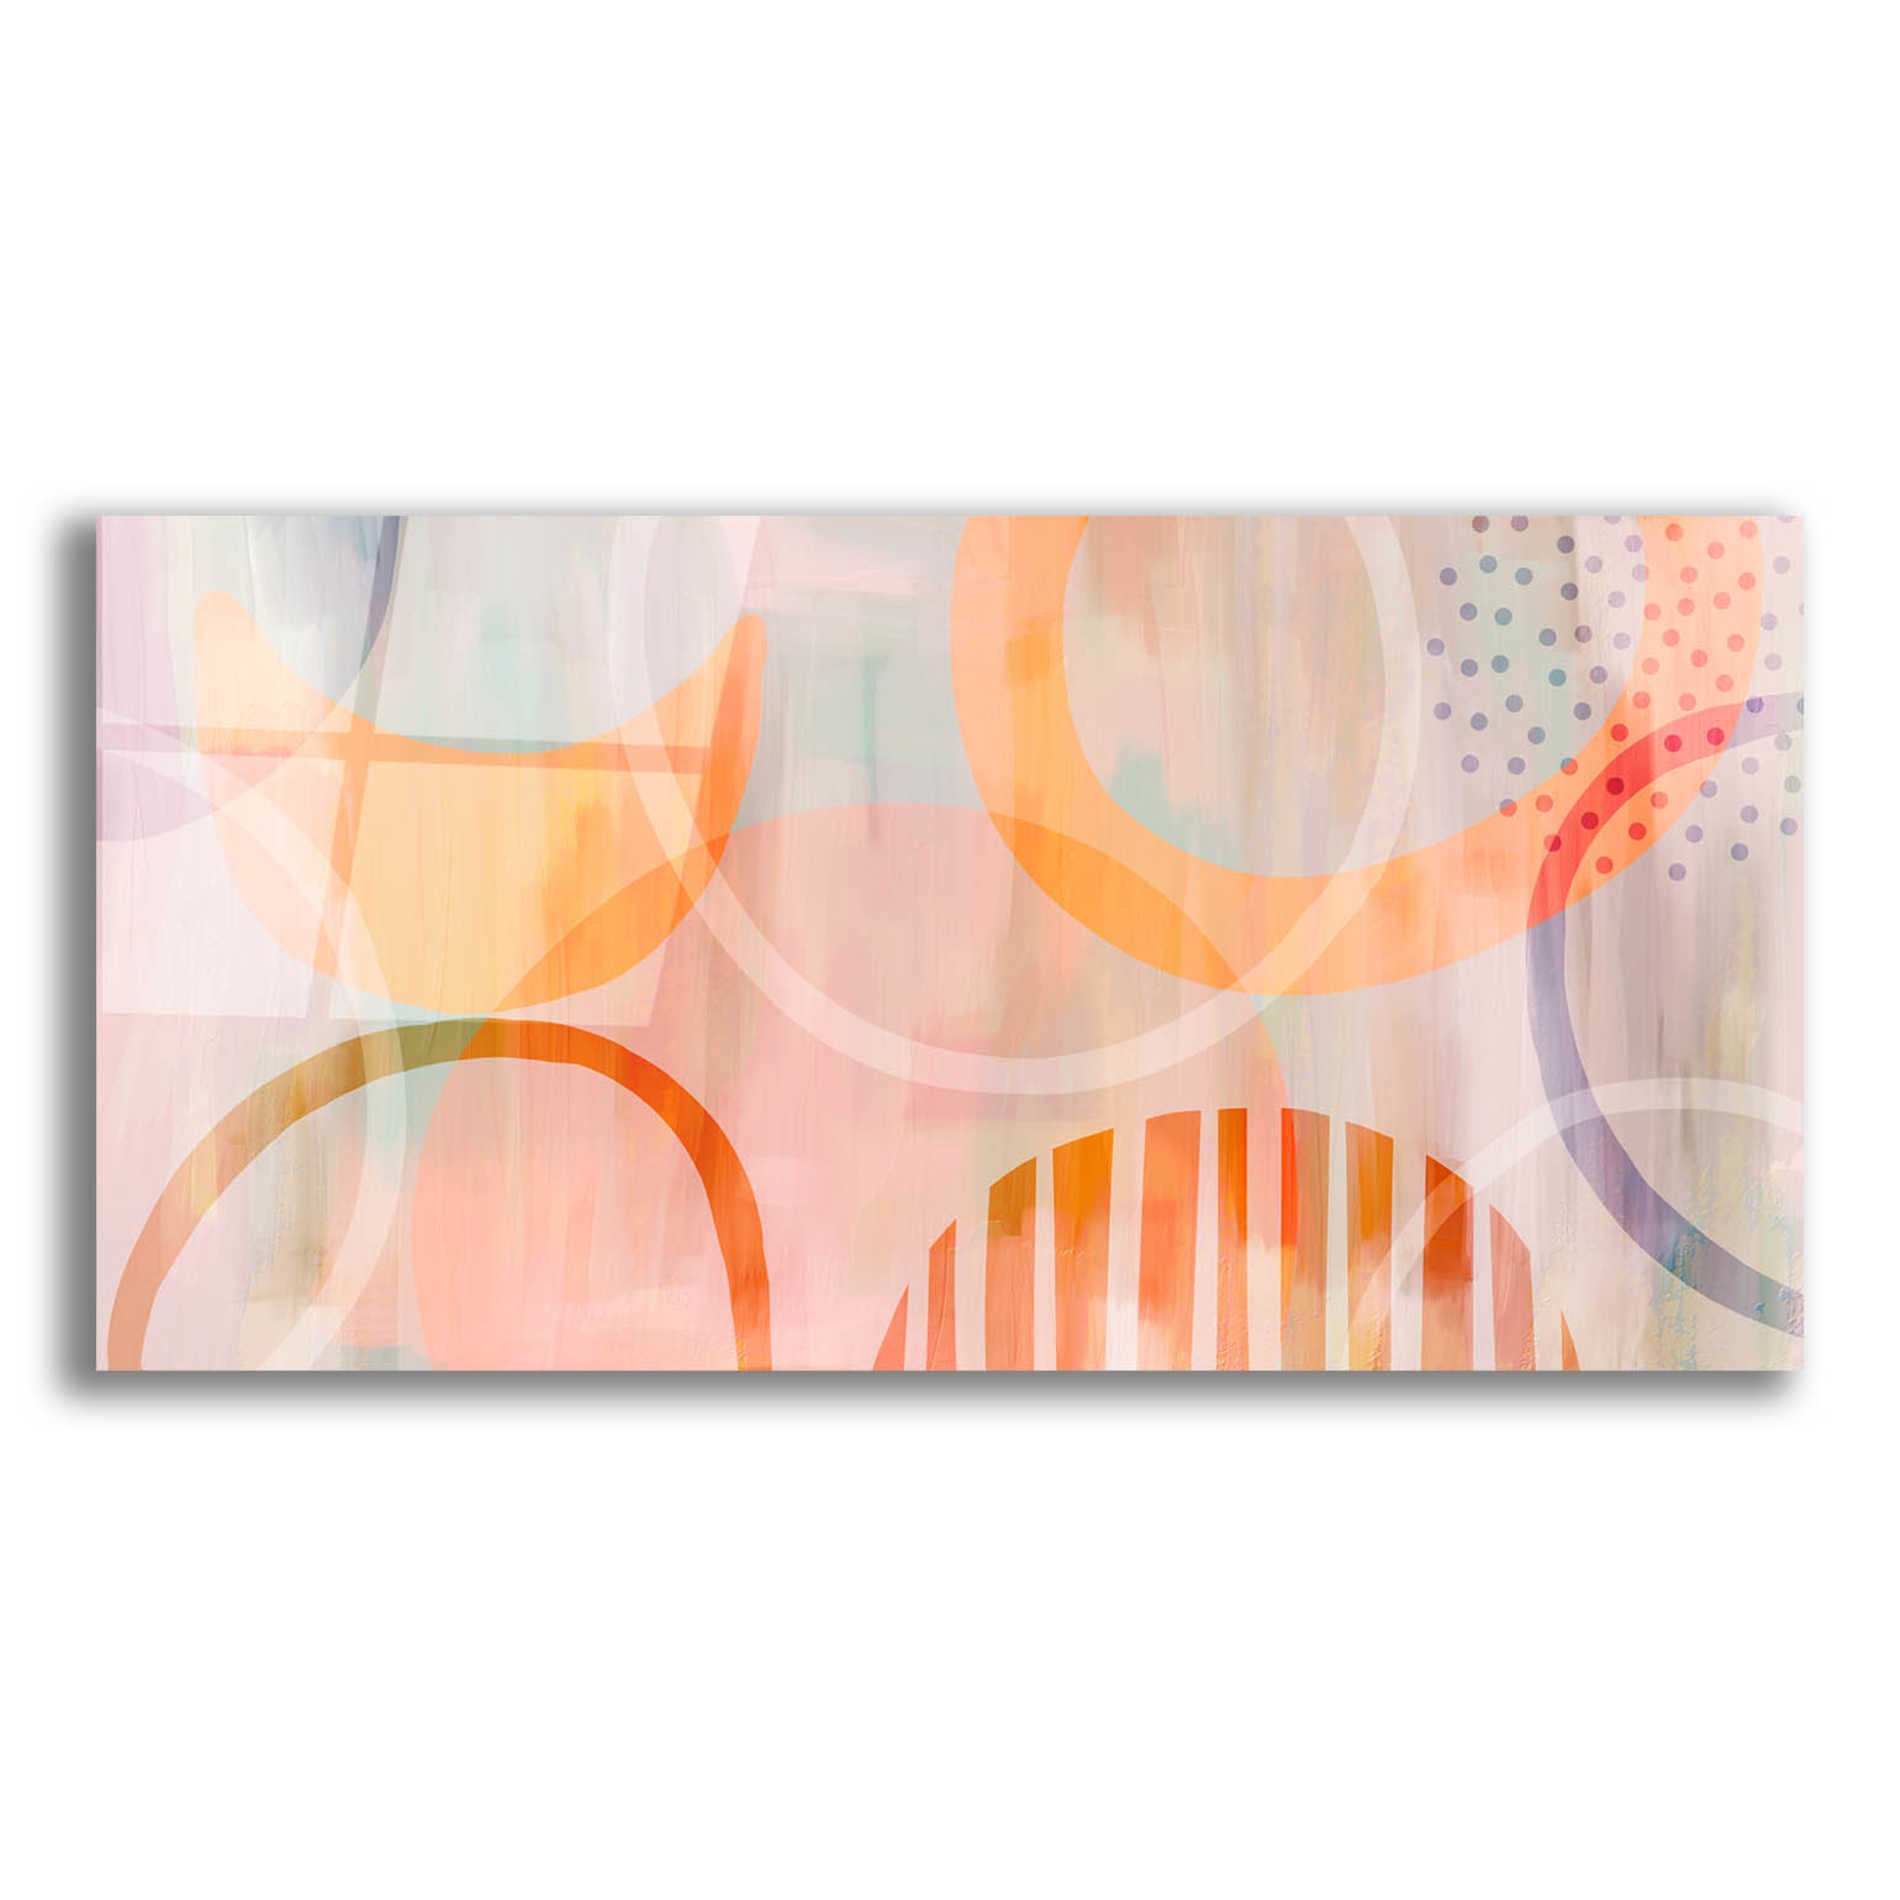 Epic Art 'Summer Tales' by Andrea Haase Acrylic Glass Wall Art,2:1 L